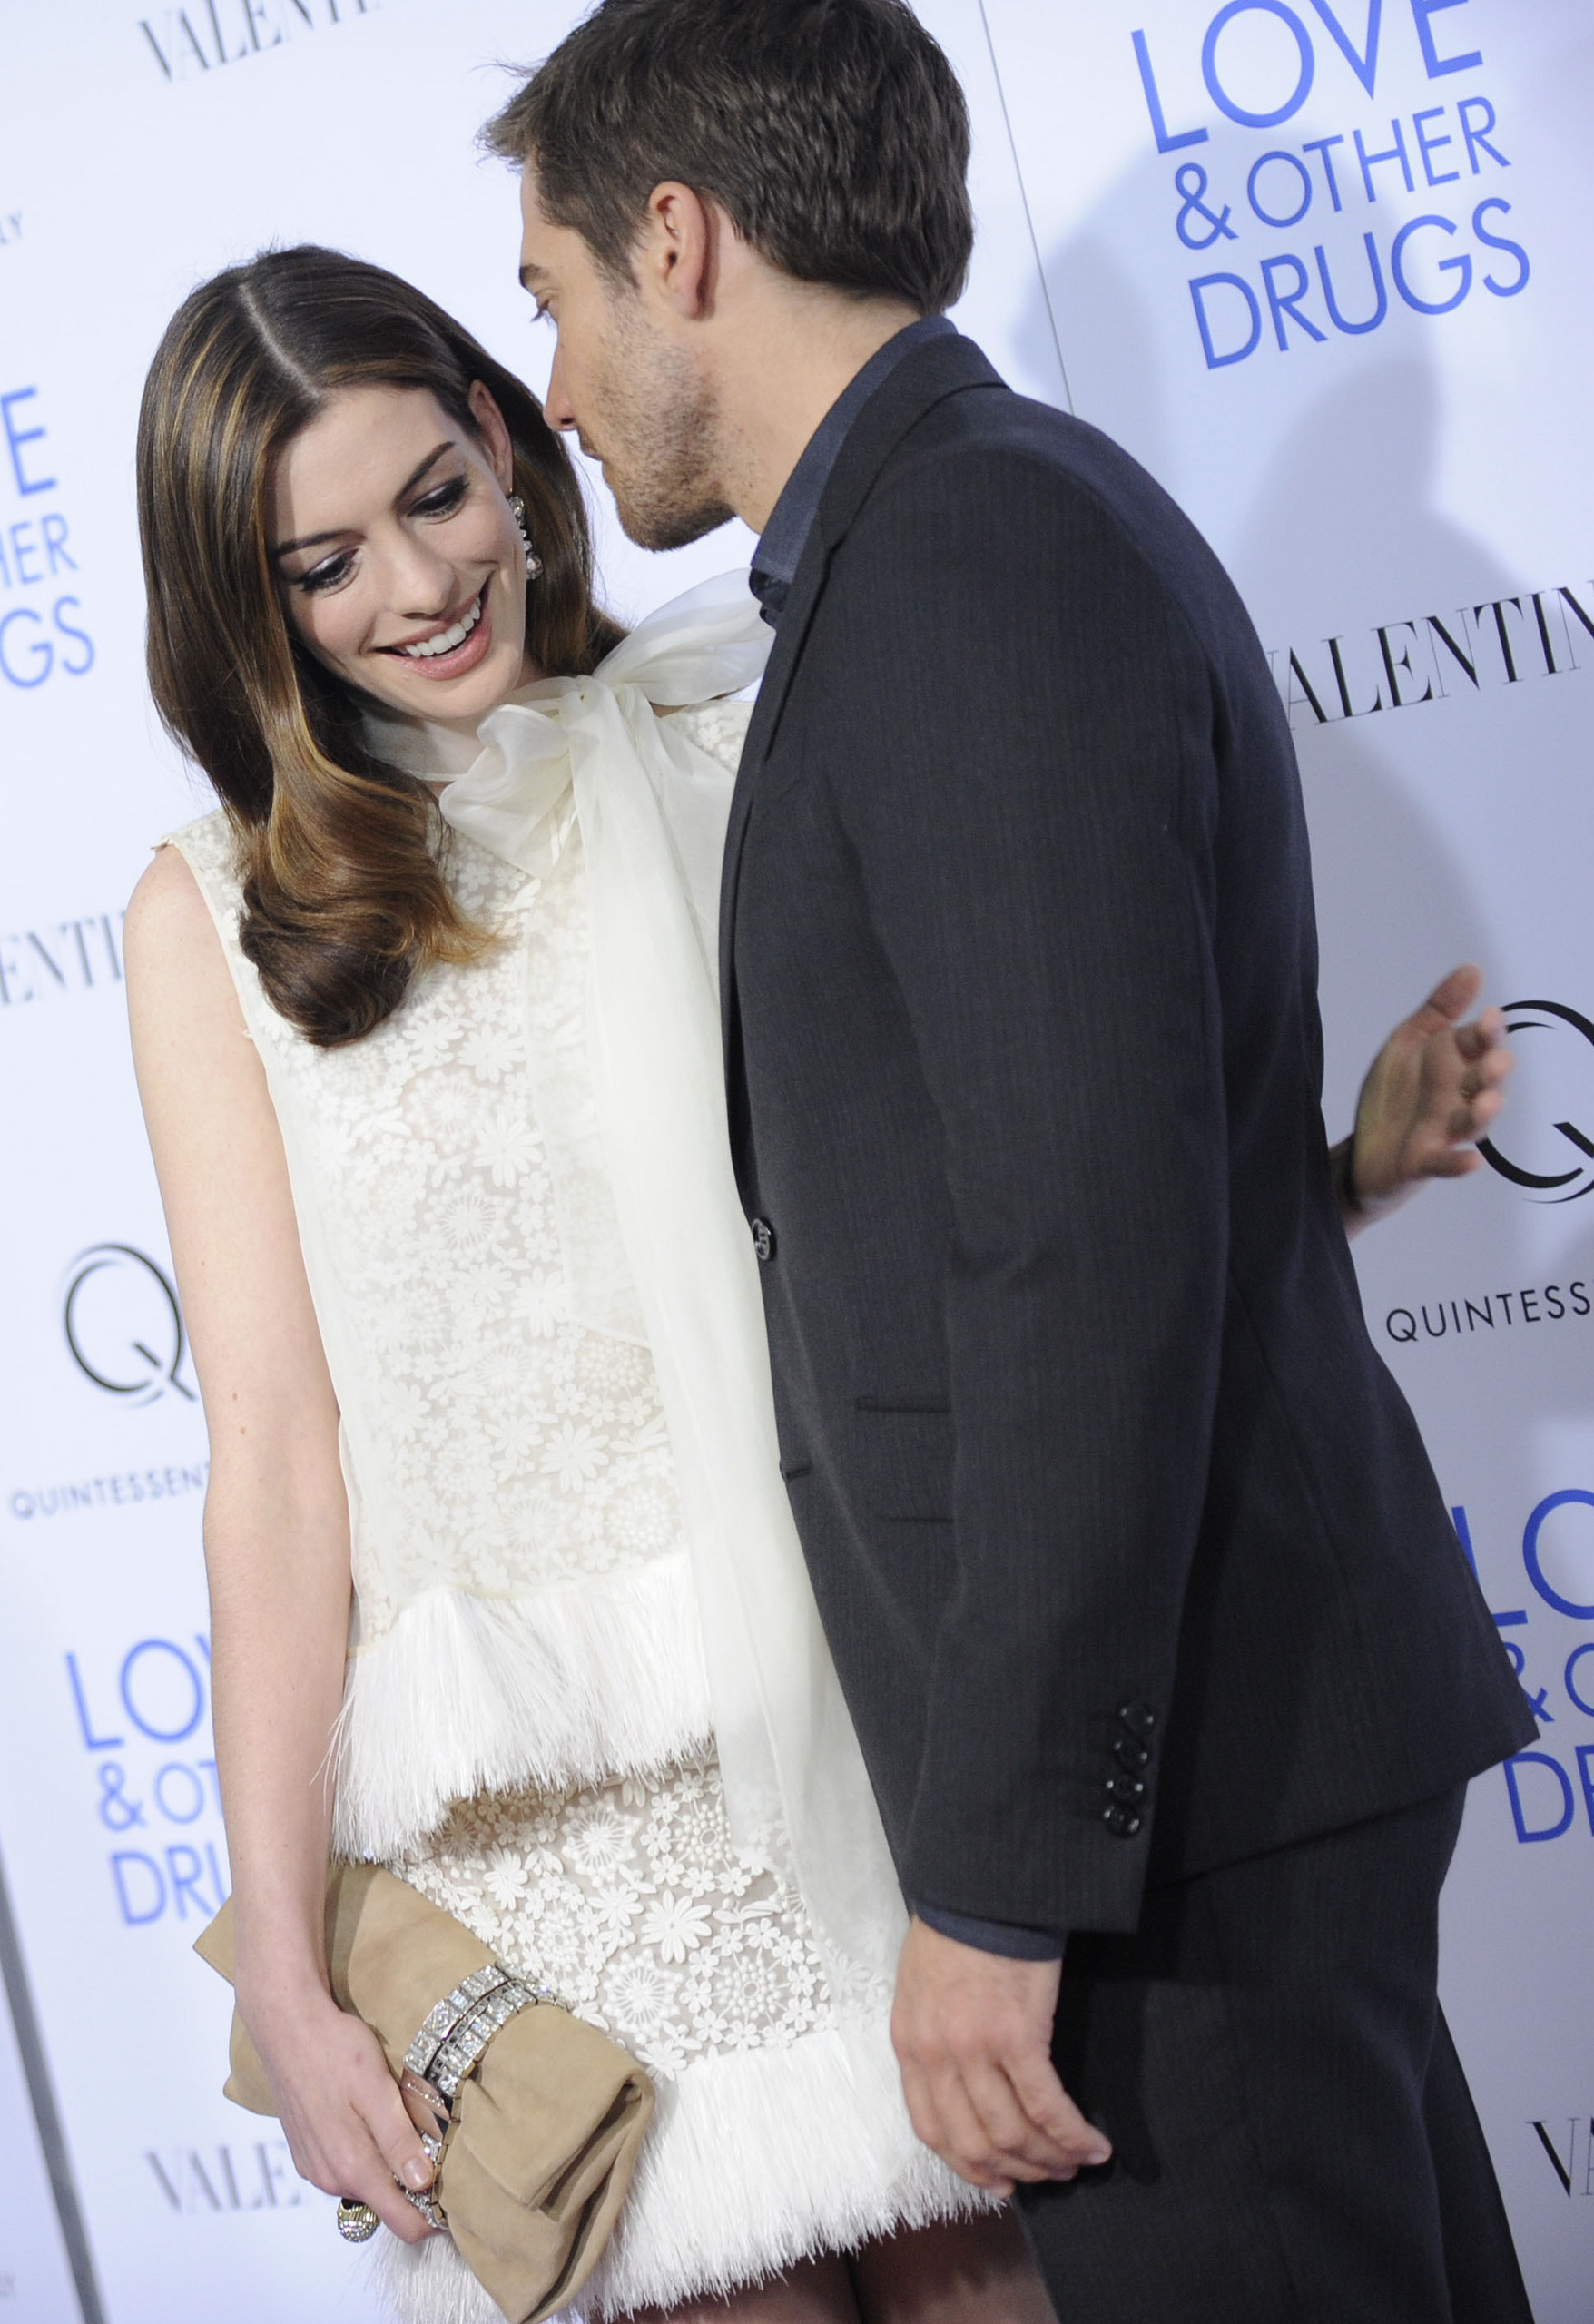 Anne Hathaway And Jake Gyllenhaal Image Love Other